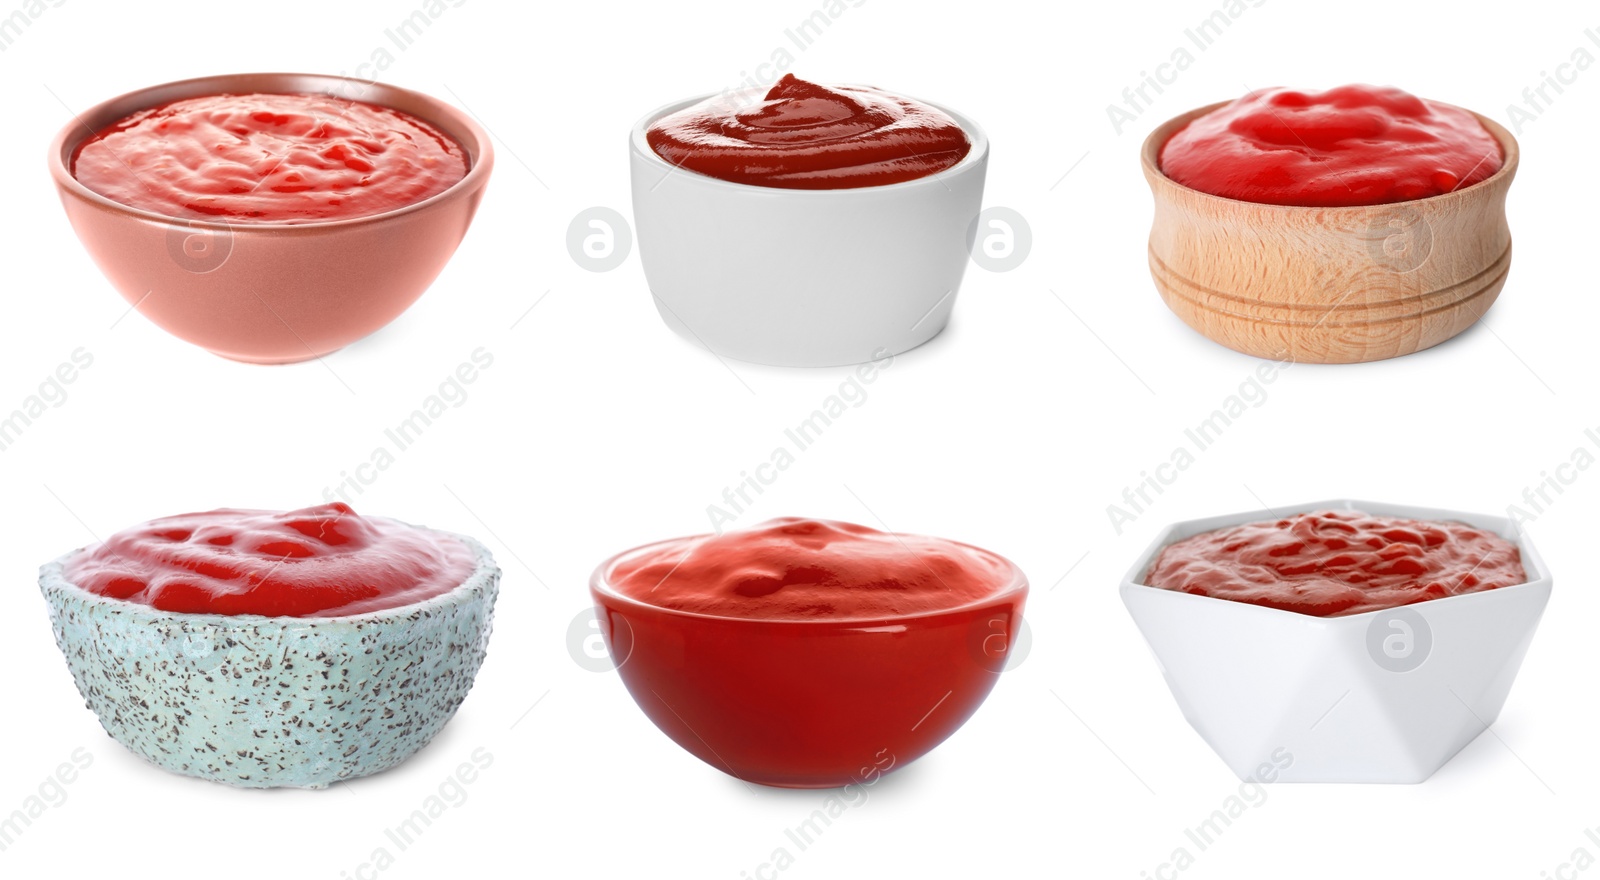 Image of Set of tomato sauces in bowls on white background